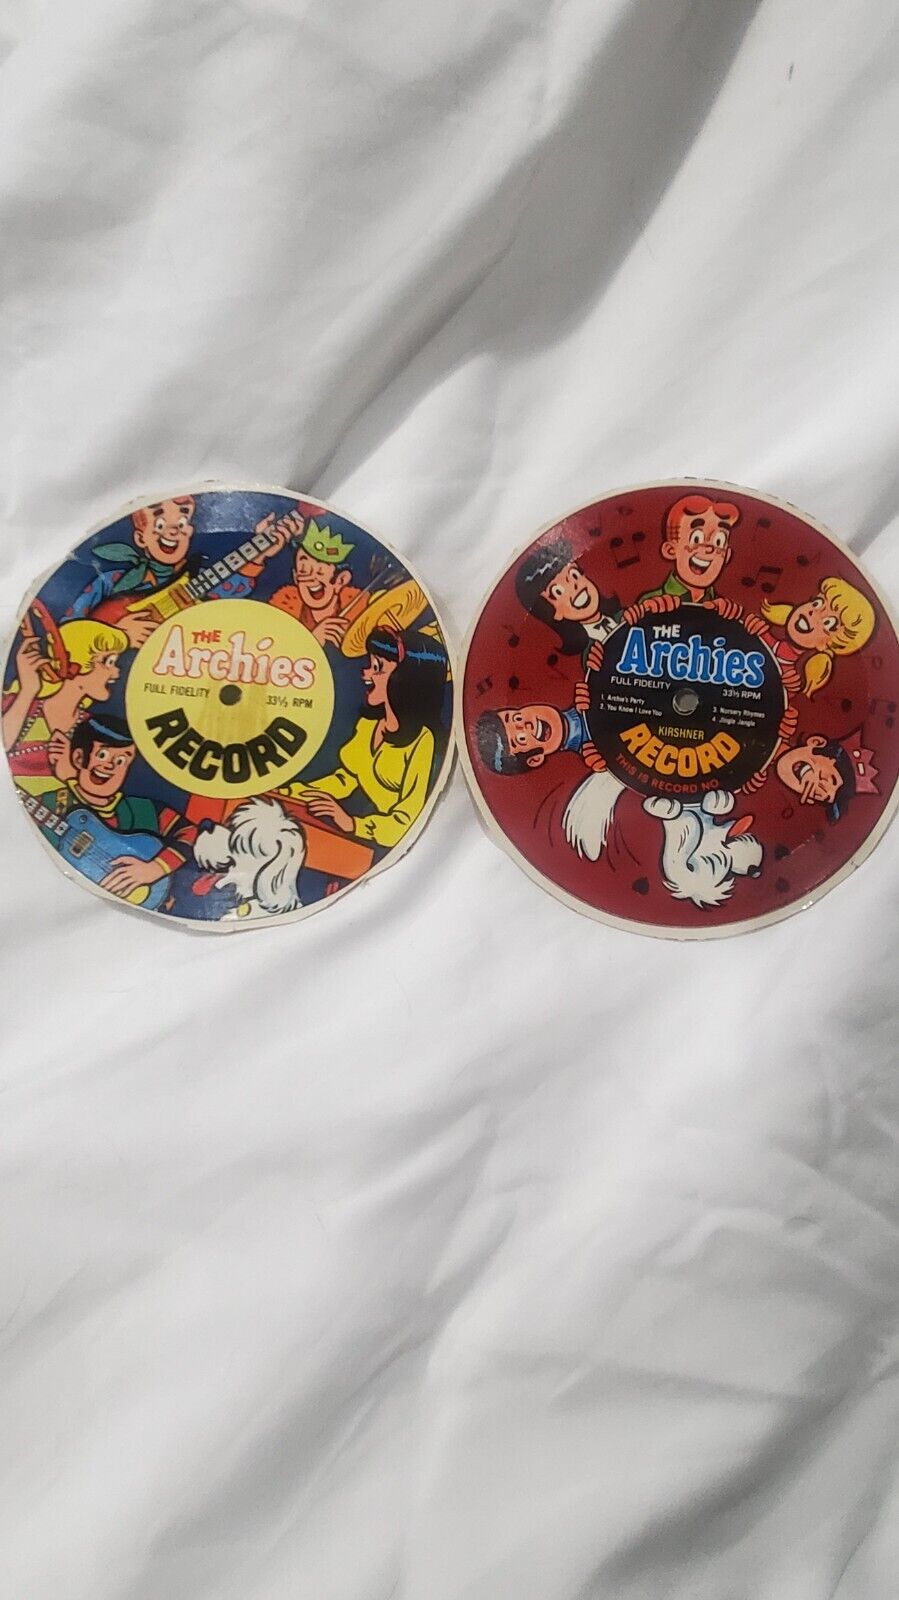 Rare Vtg. The Archies Cereal Box Records - Set Of 2